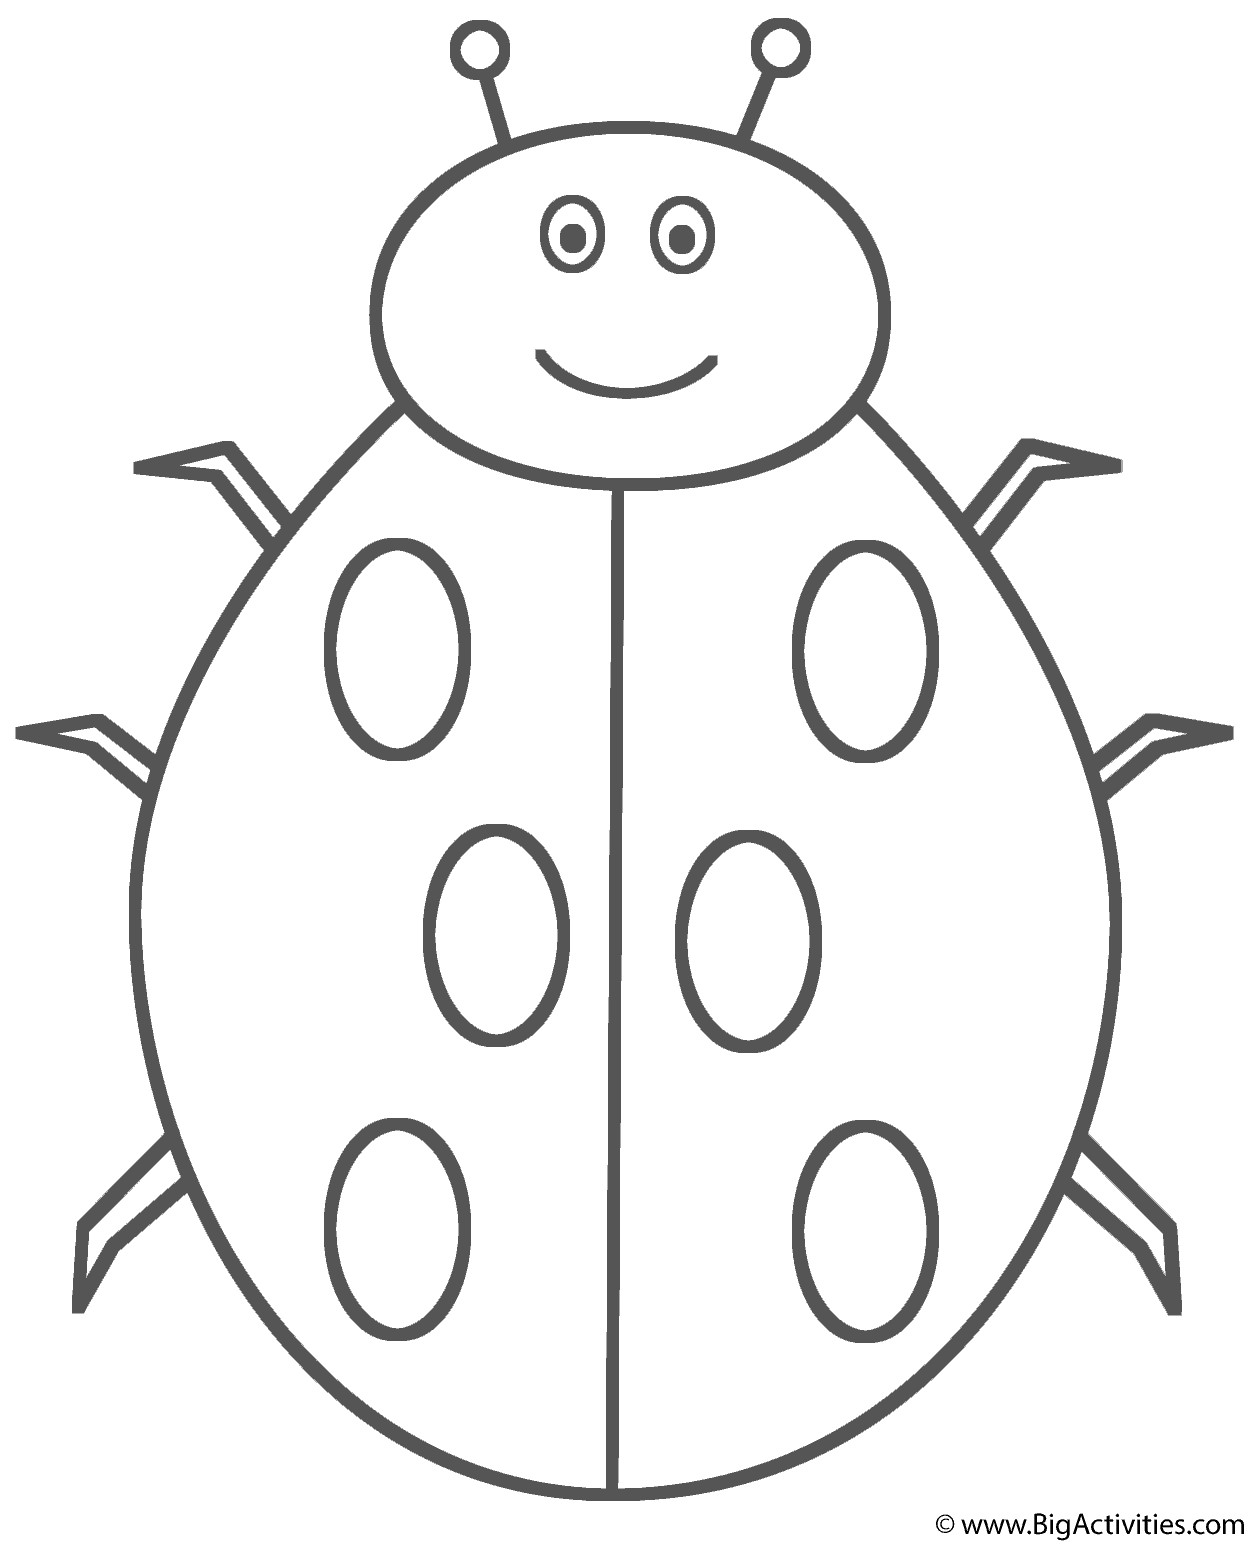 Ladybug Coloring Pages For Kids
 Ladybug Smiling Coloring Page Insects